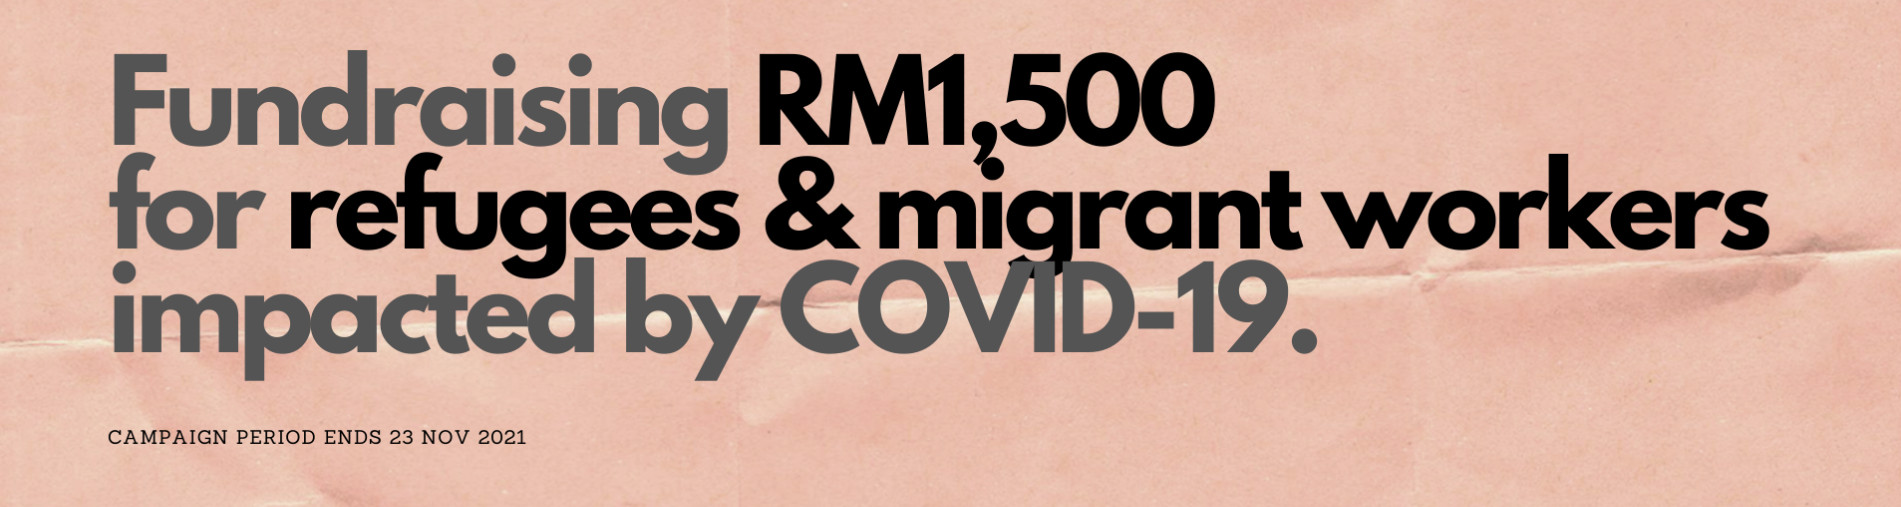 RM1,500 for refugees & migrant workers impacted by COVID